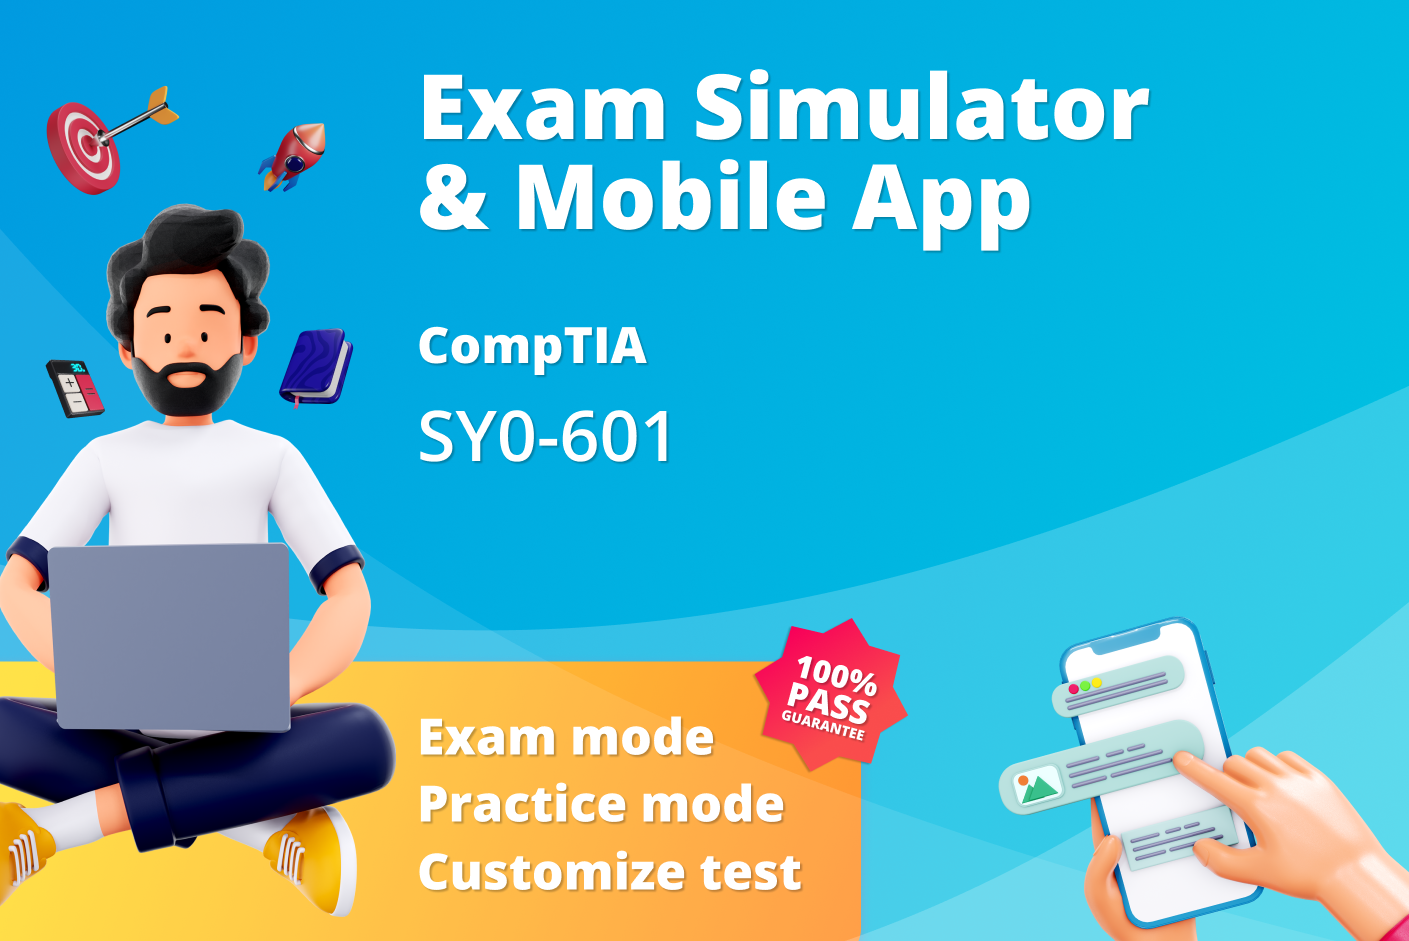 Get ready for SY0-601 mock exam practice in the United States with our comprehensive test preparation resources